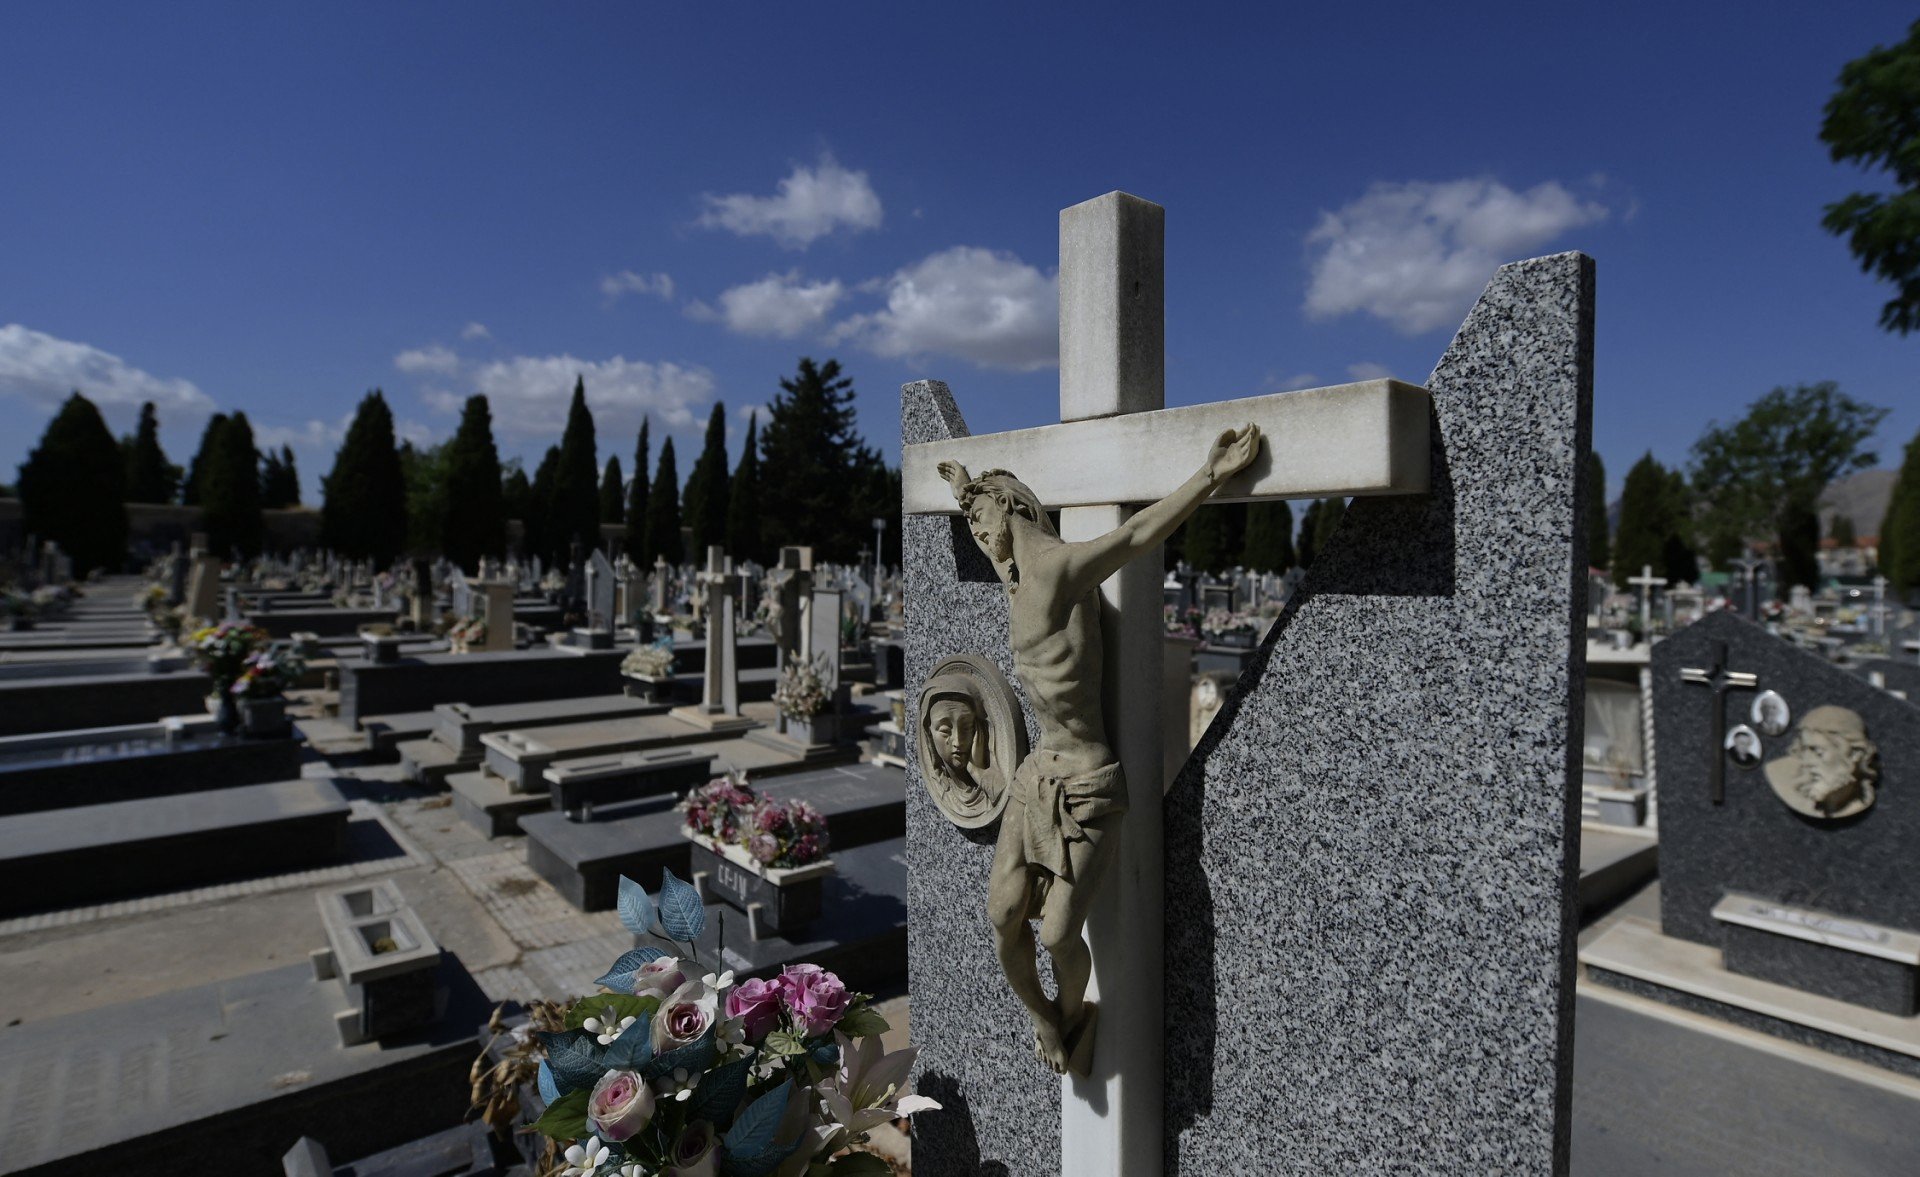 The towns in Spain where it was illegal to die